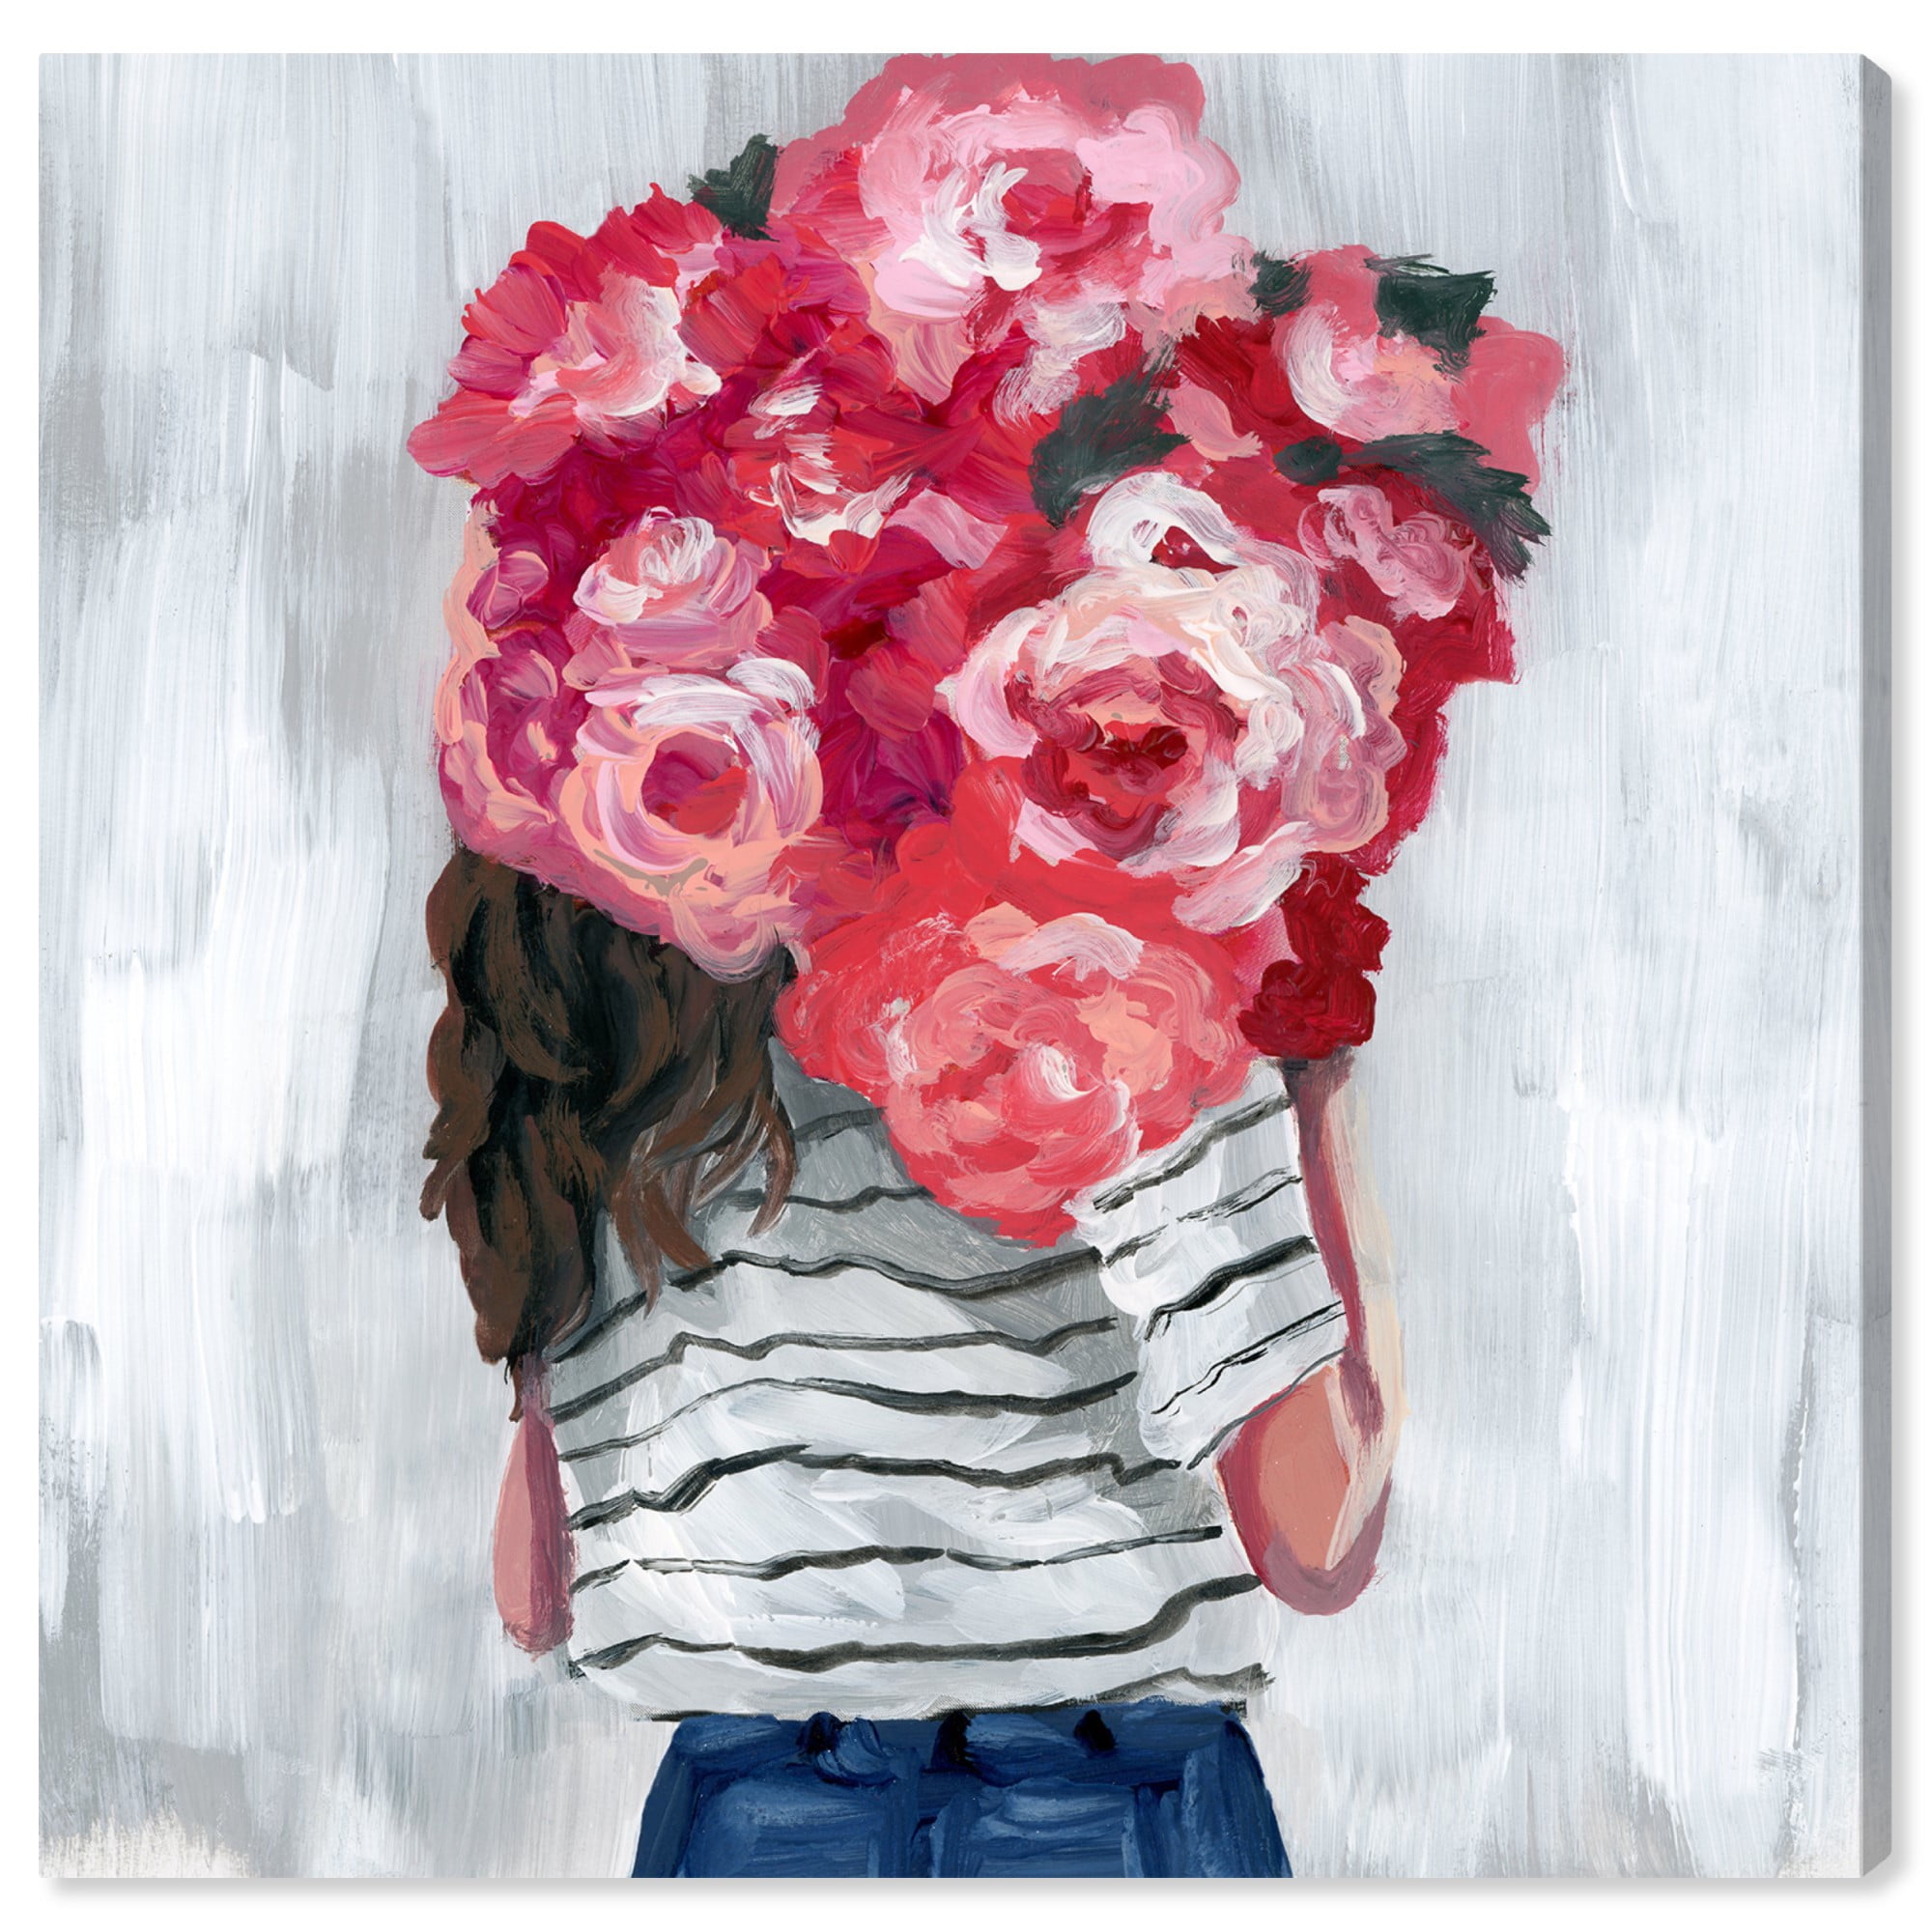 Wynwood Studio 'Flower Delivery Girl' Fashion and Glam Wall Art Canvas Print - Pink, White, 30 inch x 30 inch, Size: 30 x 30